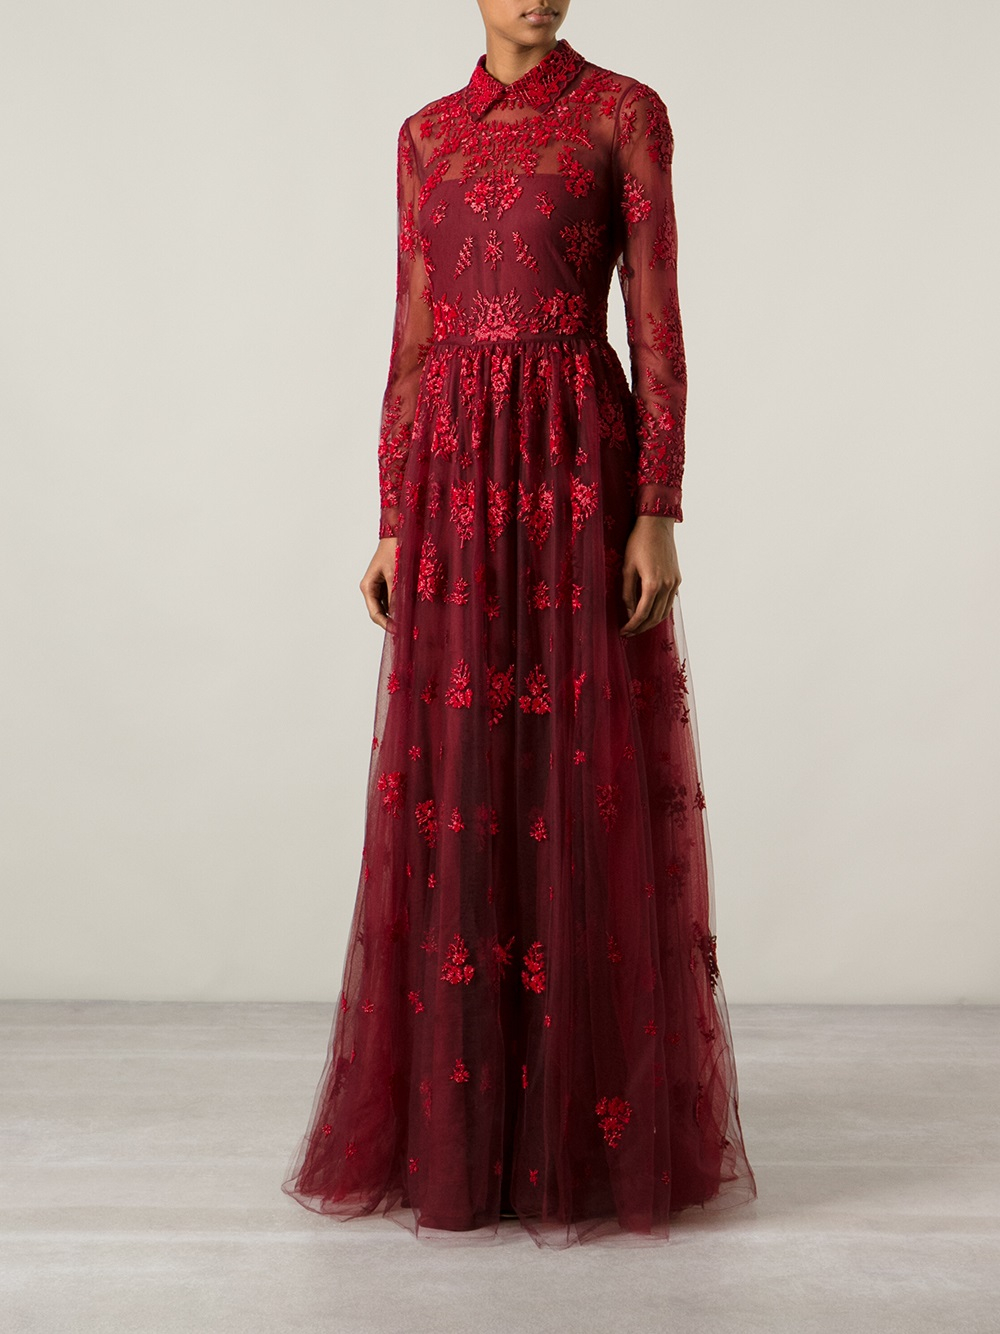 Valentino Beaded Evening Dress in Red | Lyst